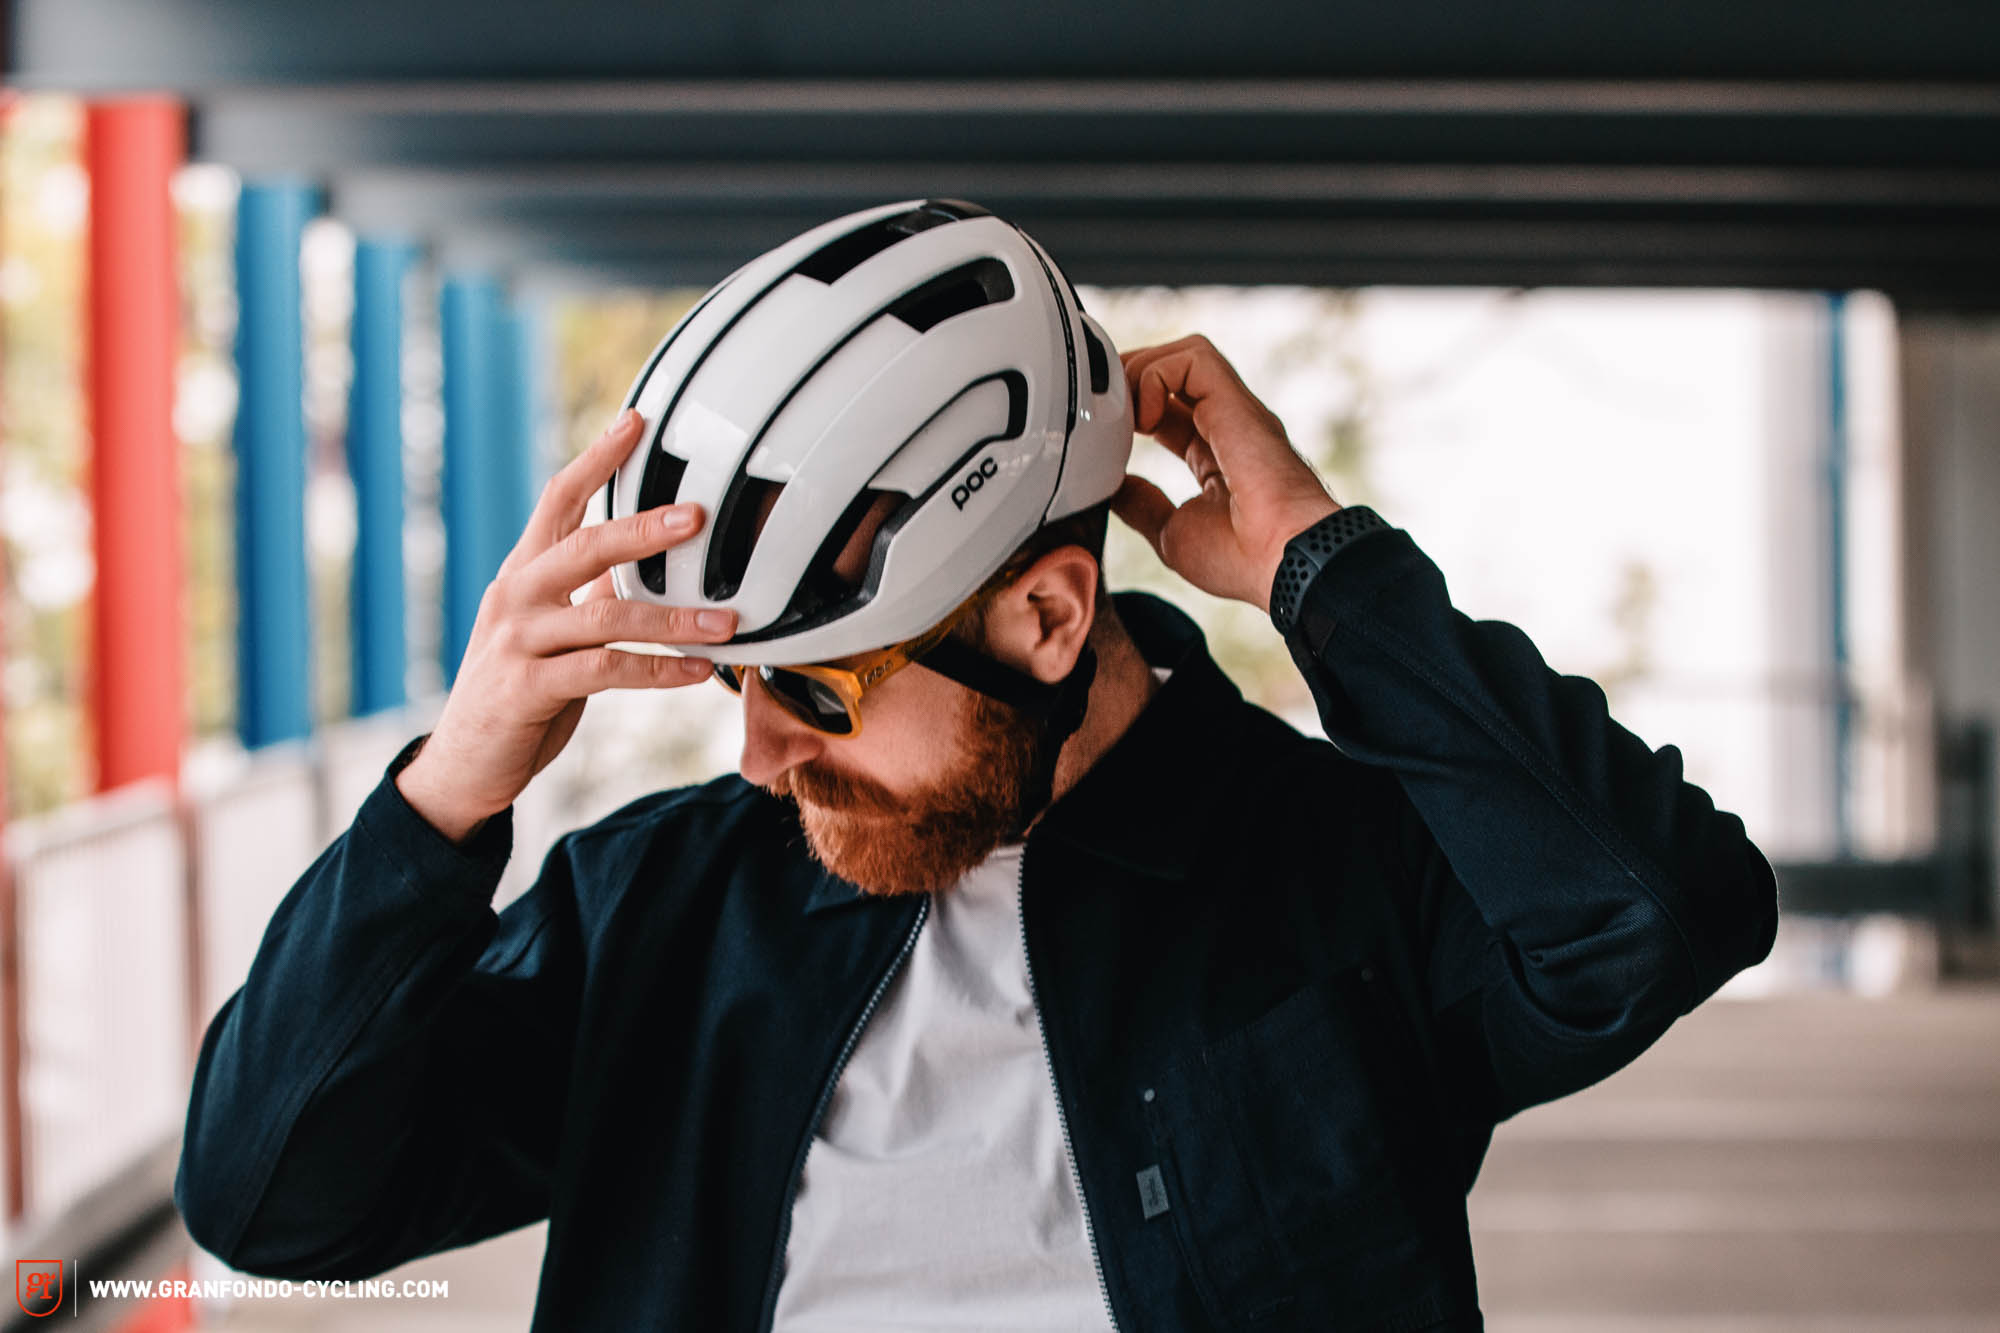  POC, Omne Air Spin Bike Helmet for Commuters and Road